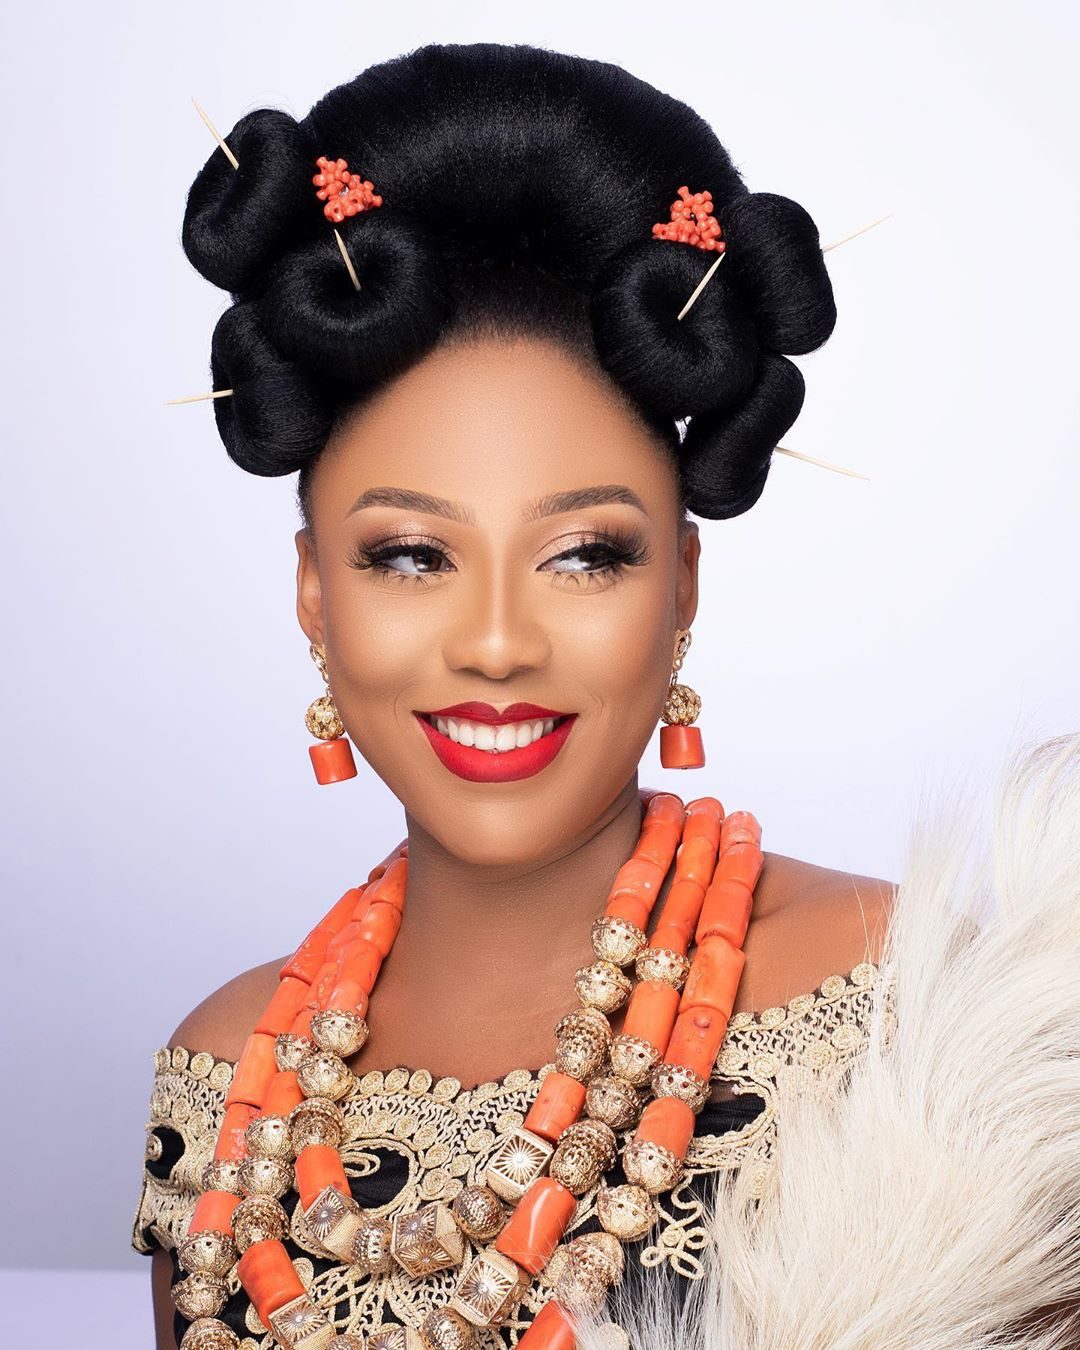 You've Got to See this 3 Mini Bun Trad Hairstyle for Igbo Brides